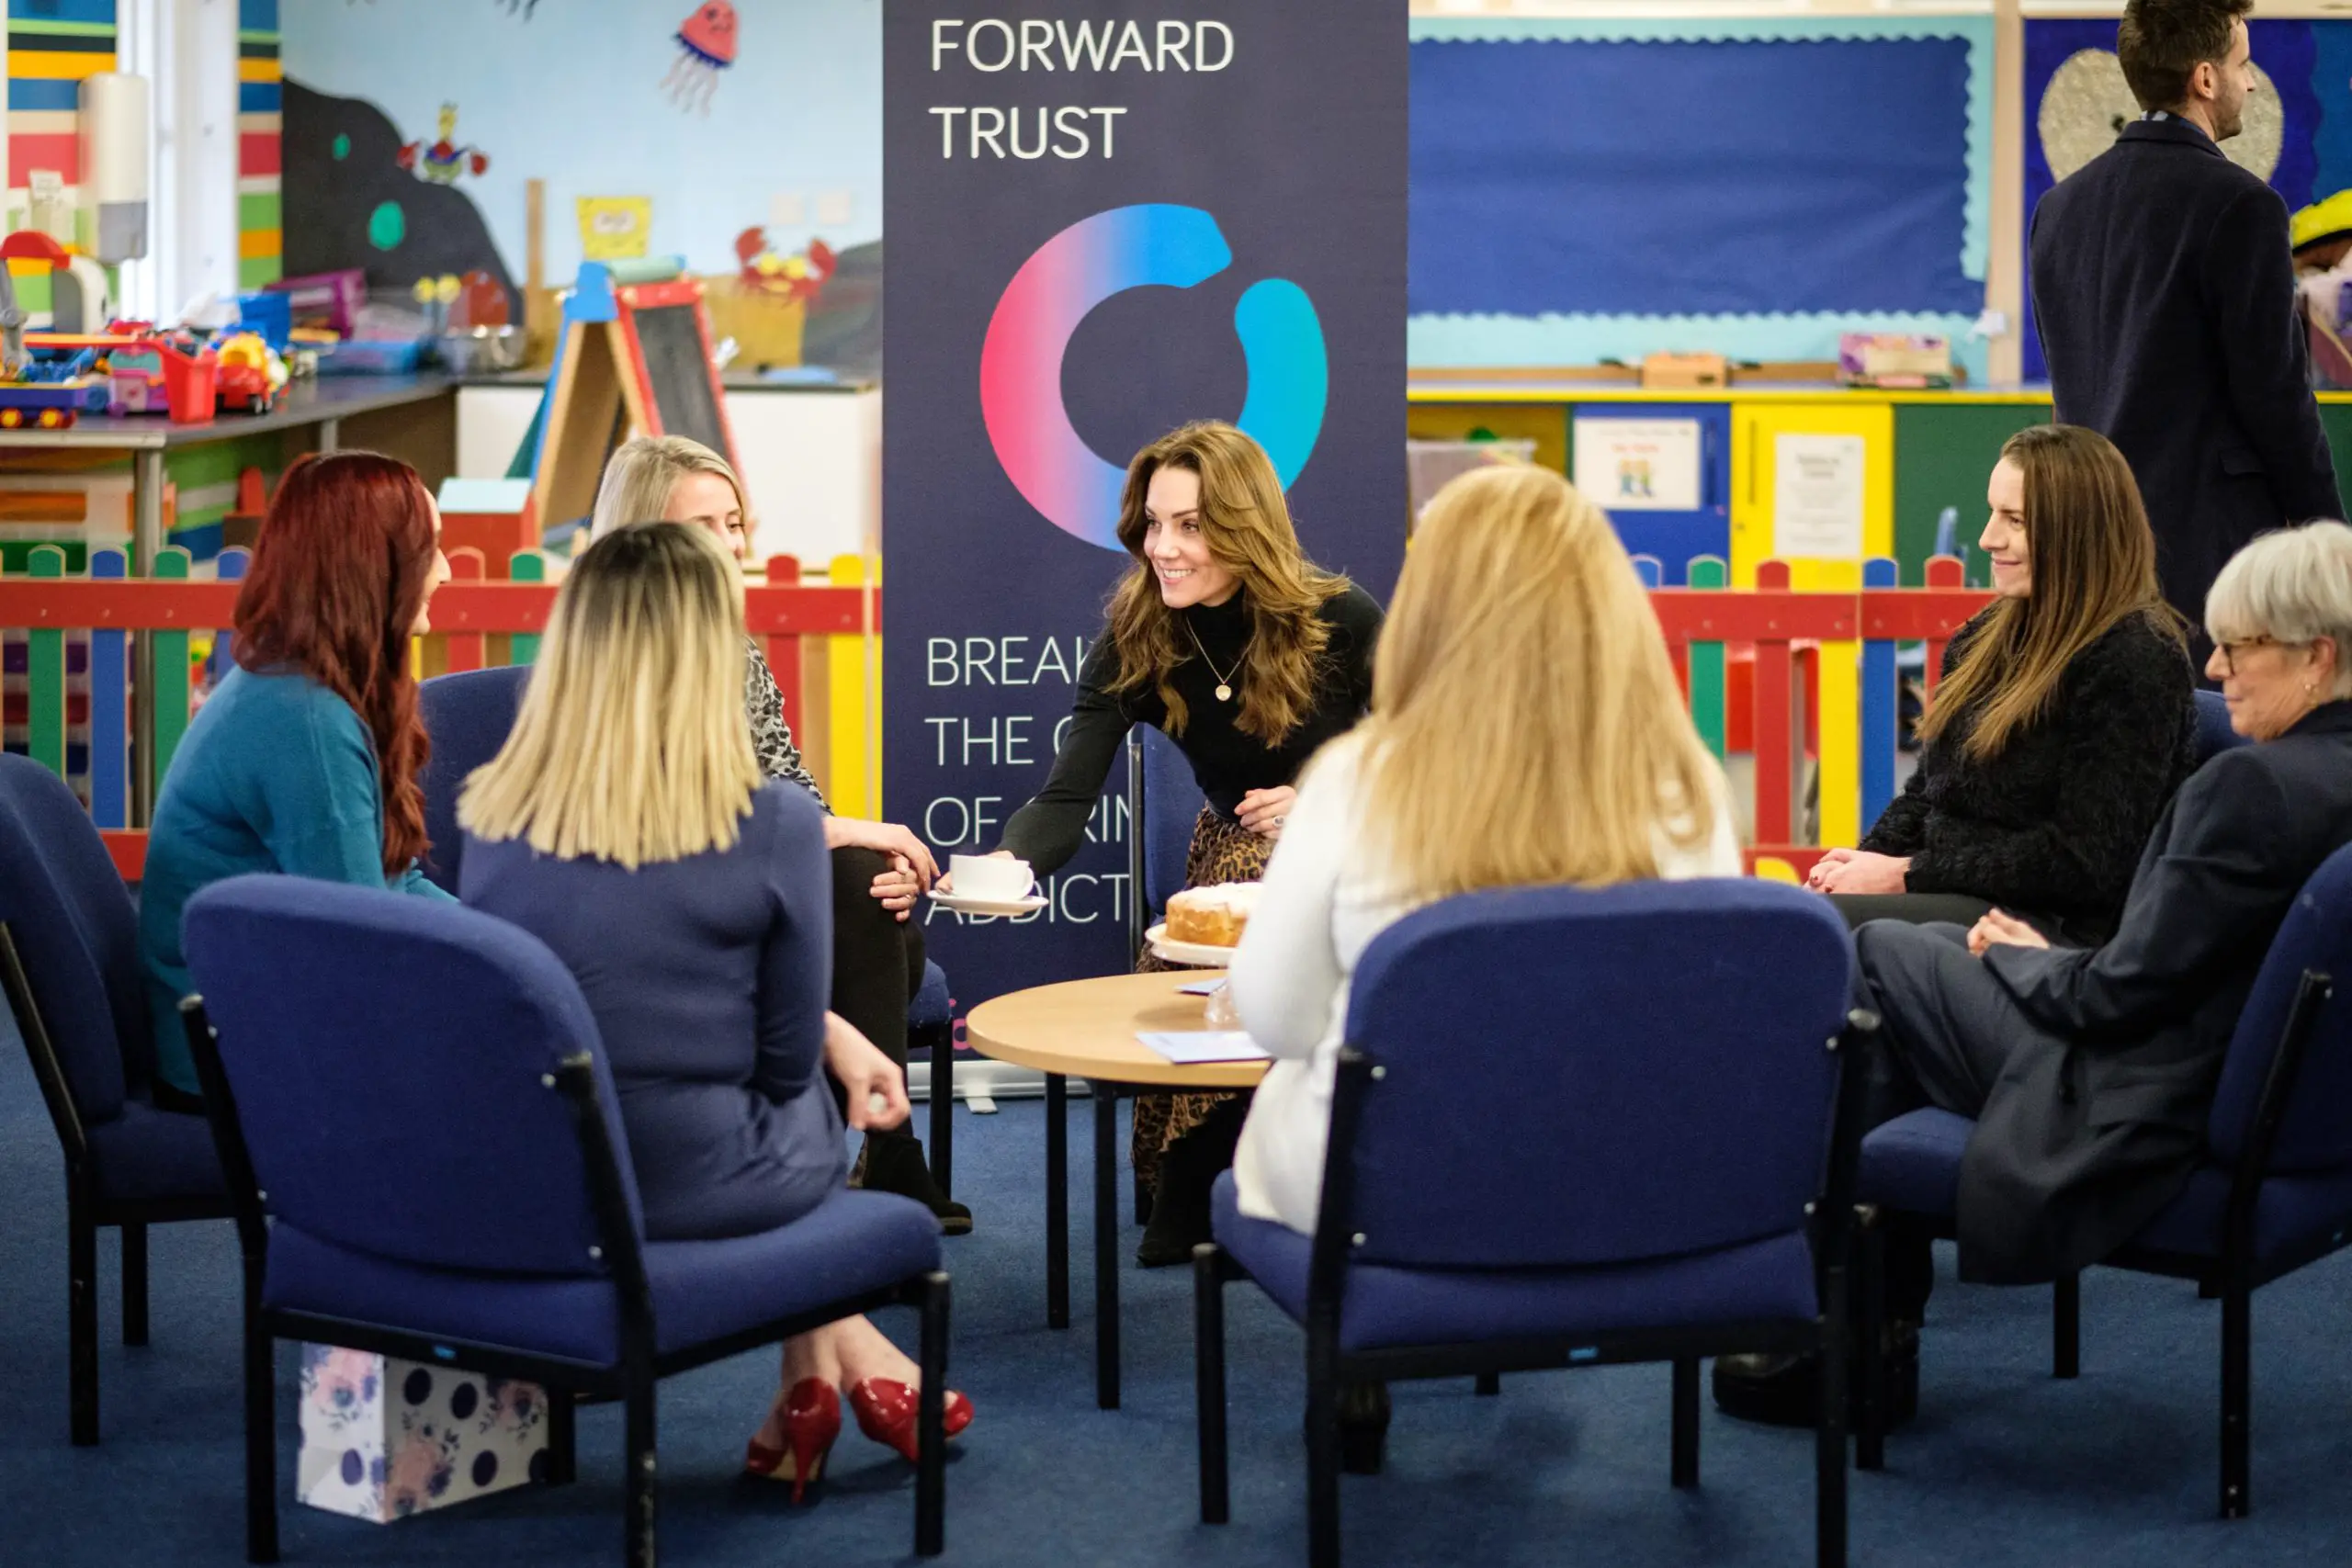 The Duchess of Cambridge met with the members of The Forward Trust at HM Surrey Prison